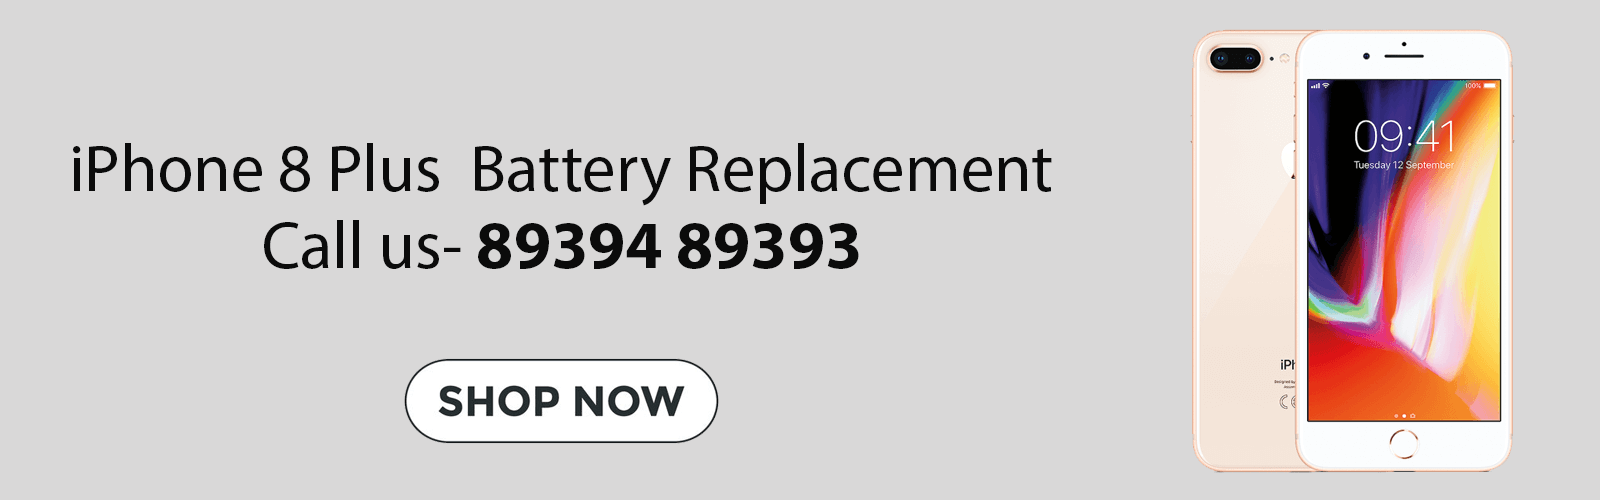 iPhone 8 Plus Battery Replacement Price Chennai